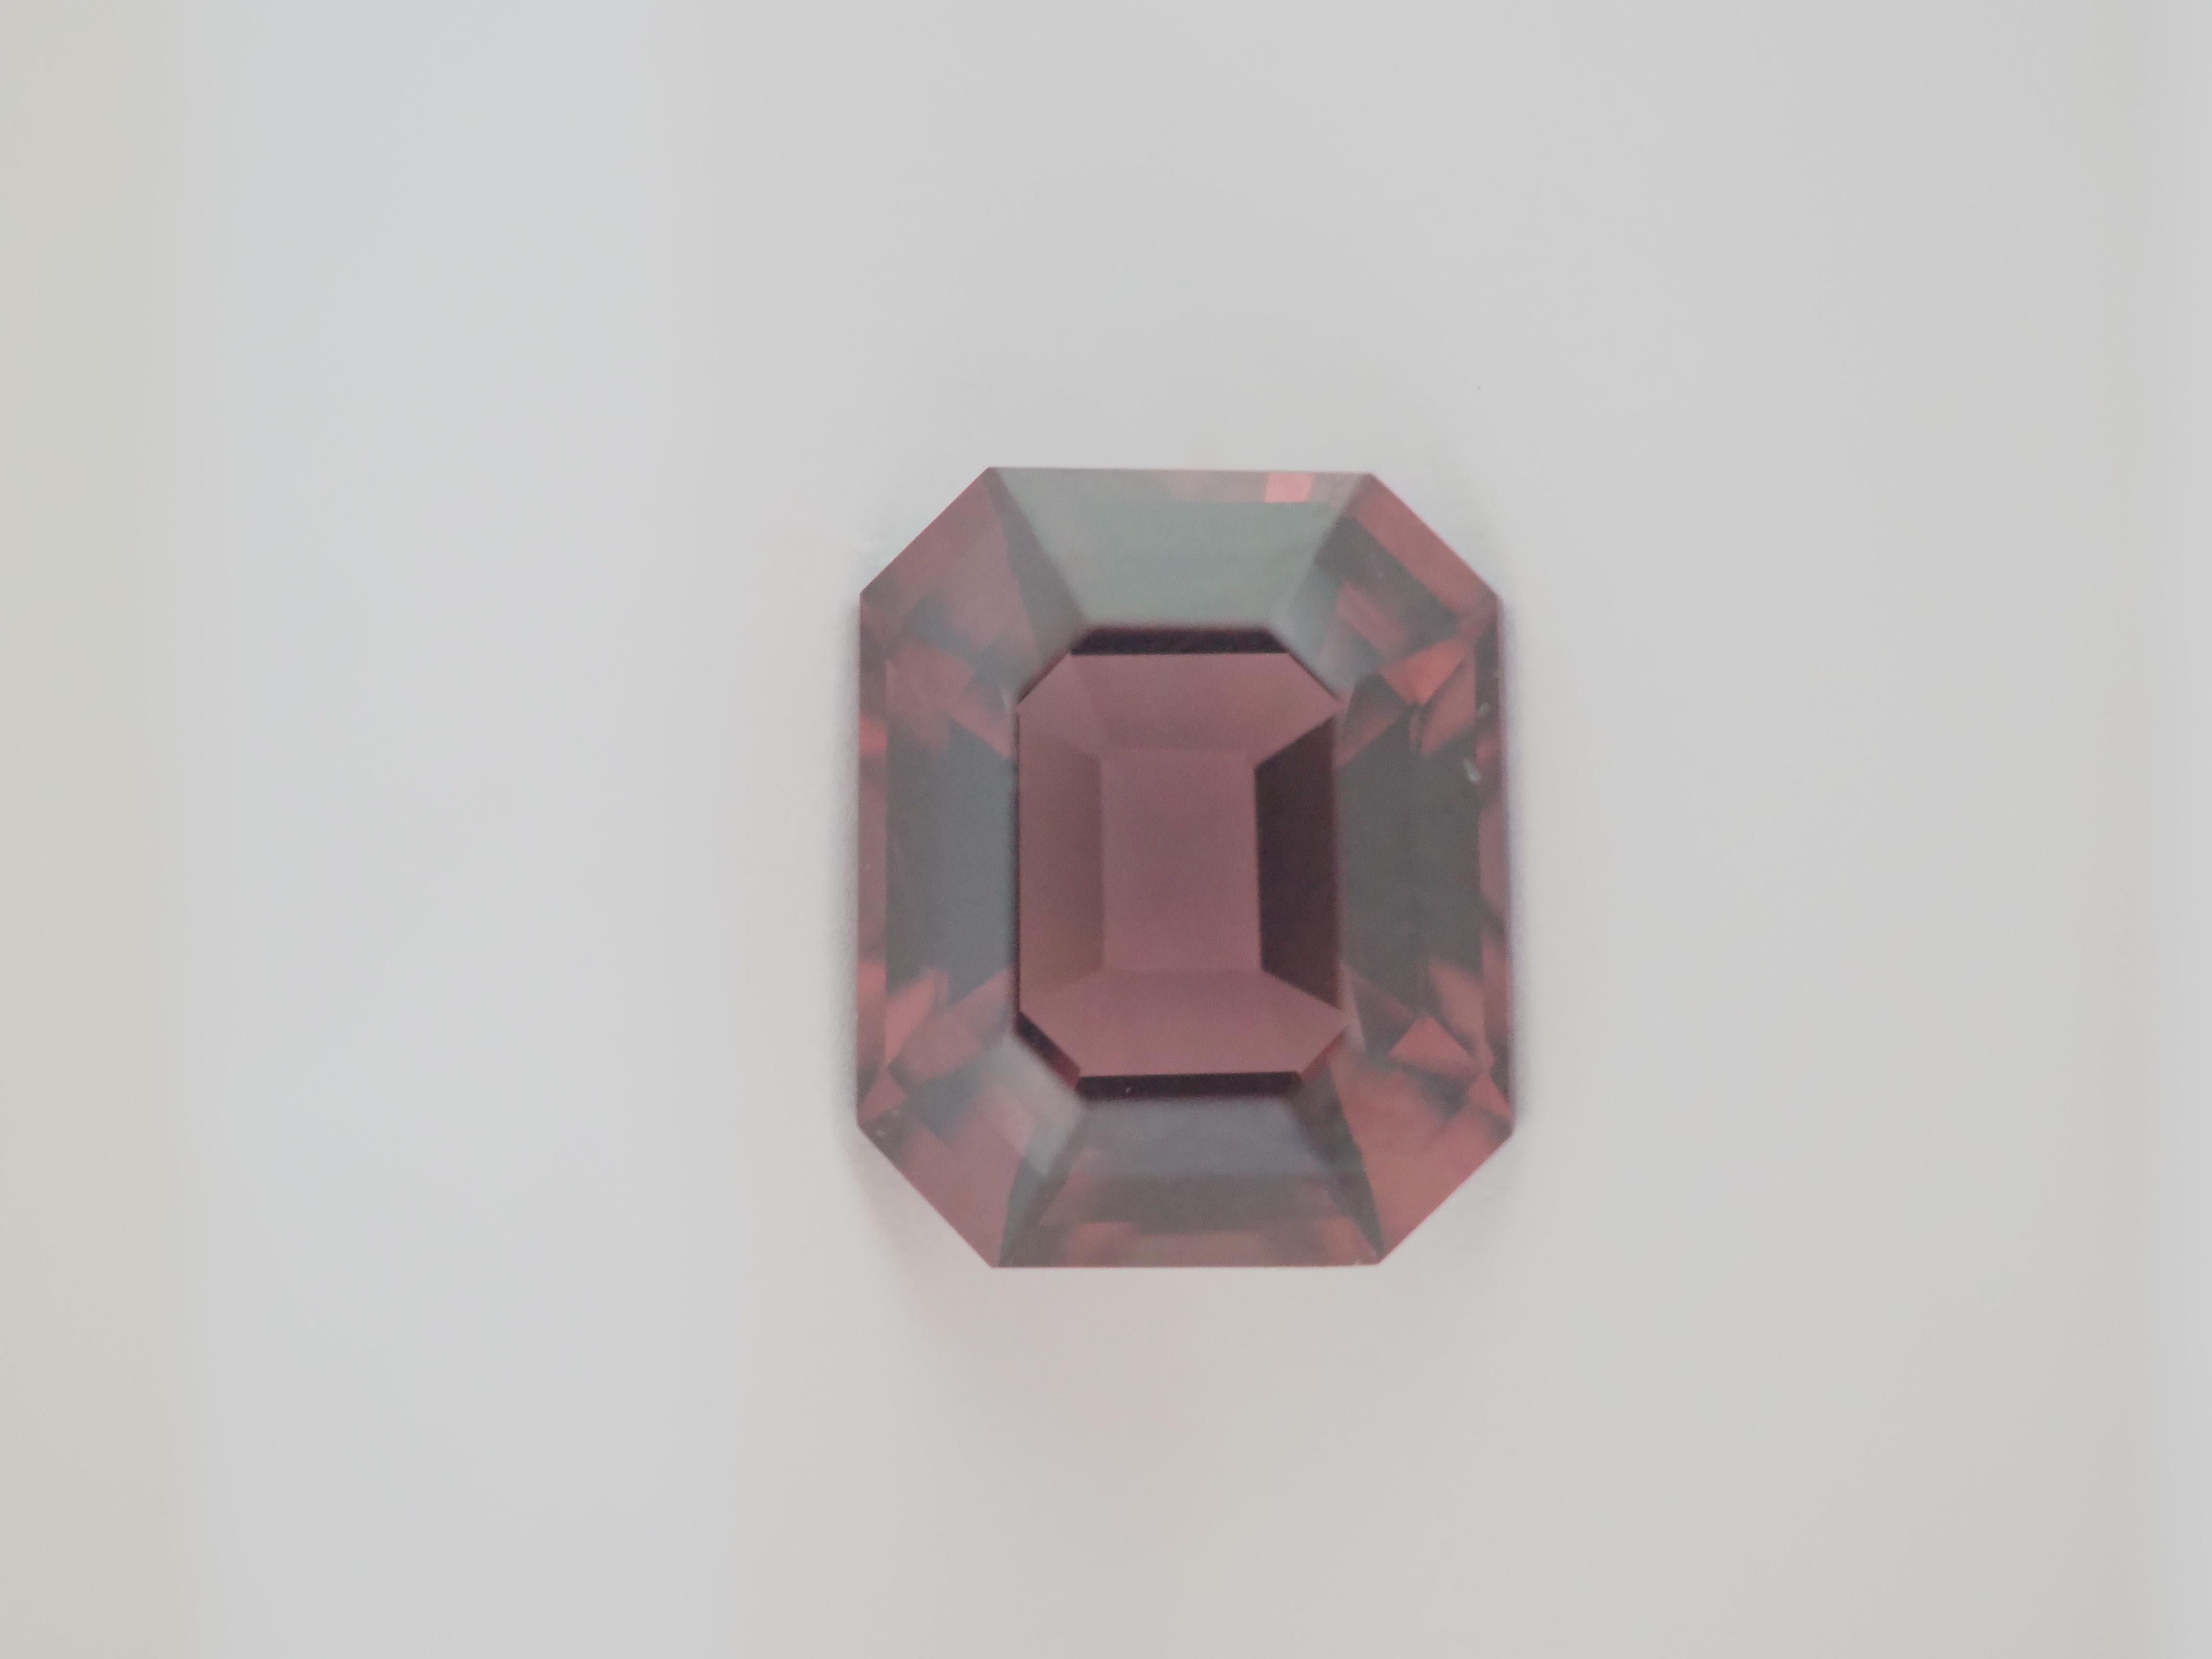 Eye clean.

This particular gem measures approximately 8.01x9.75x5.29mm, providing ample space for intricate and creative jewelry designs. 

Pinkish-purple color emerald cut Burma spinel with GLC lab report card.
Weight= 3.74 carats

The country of